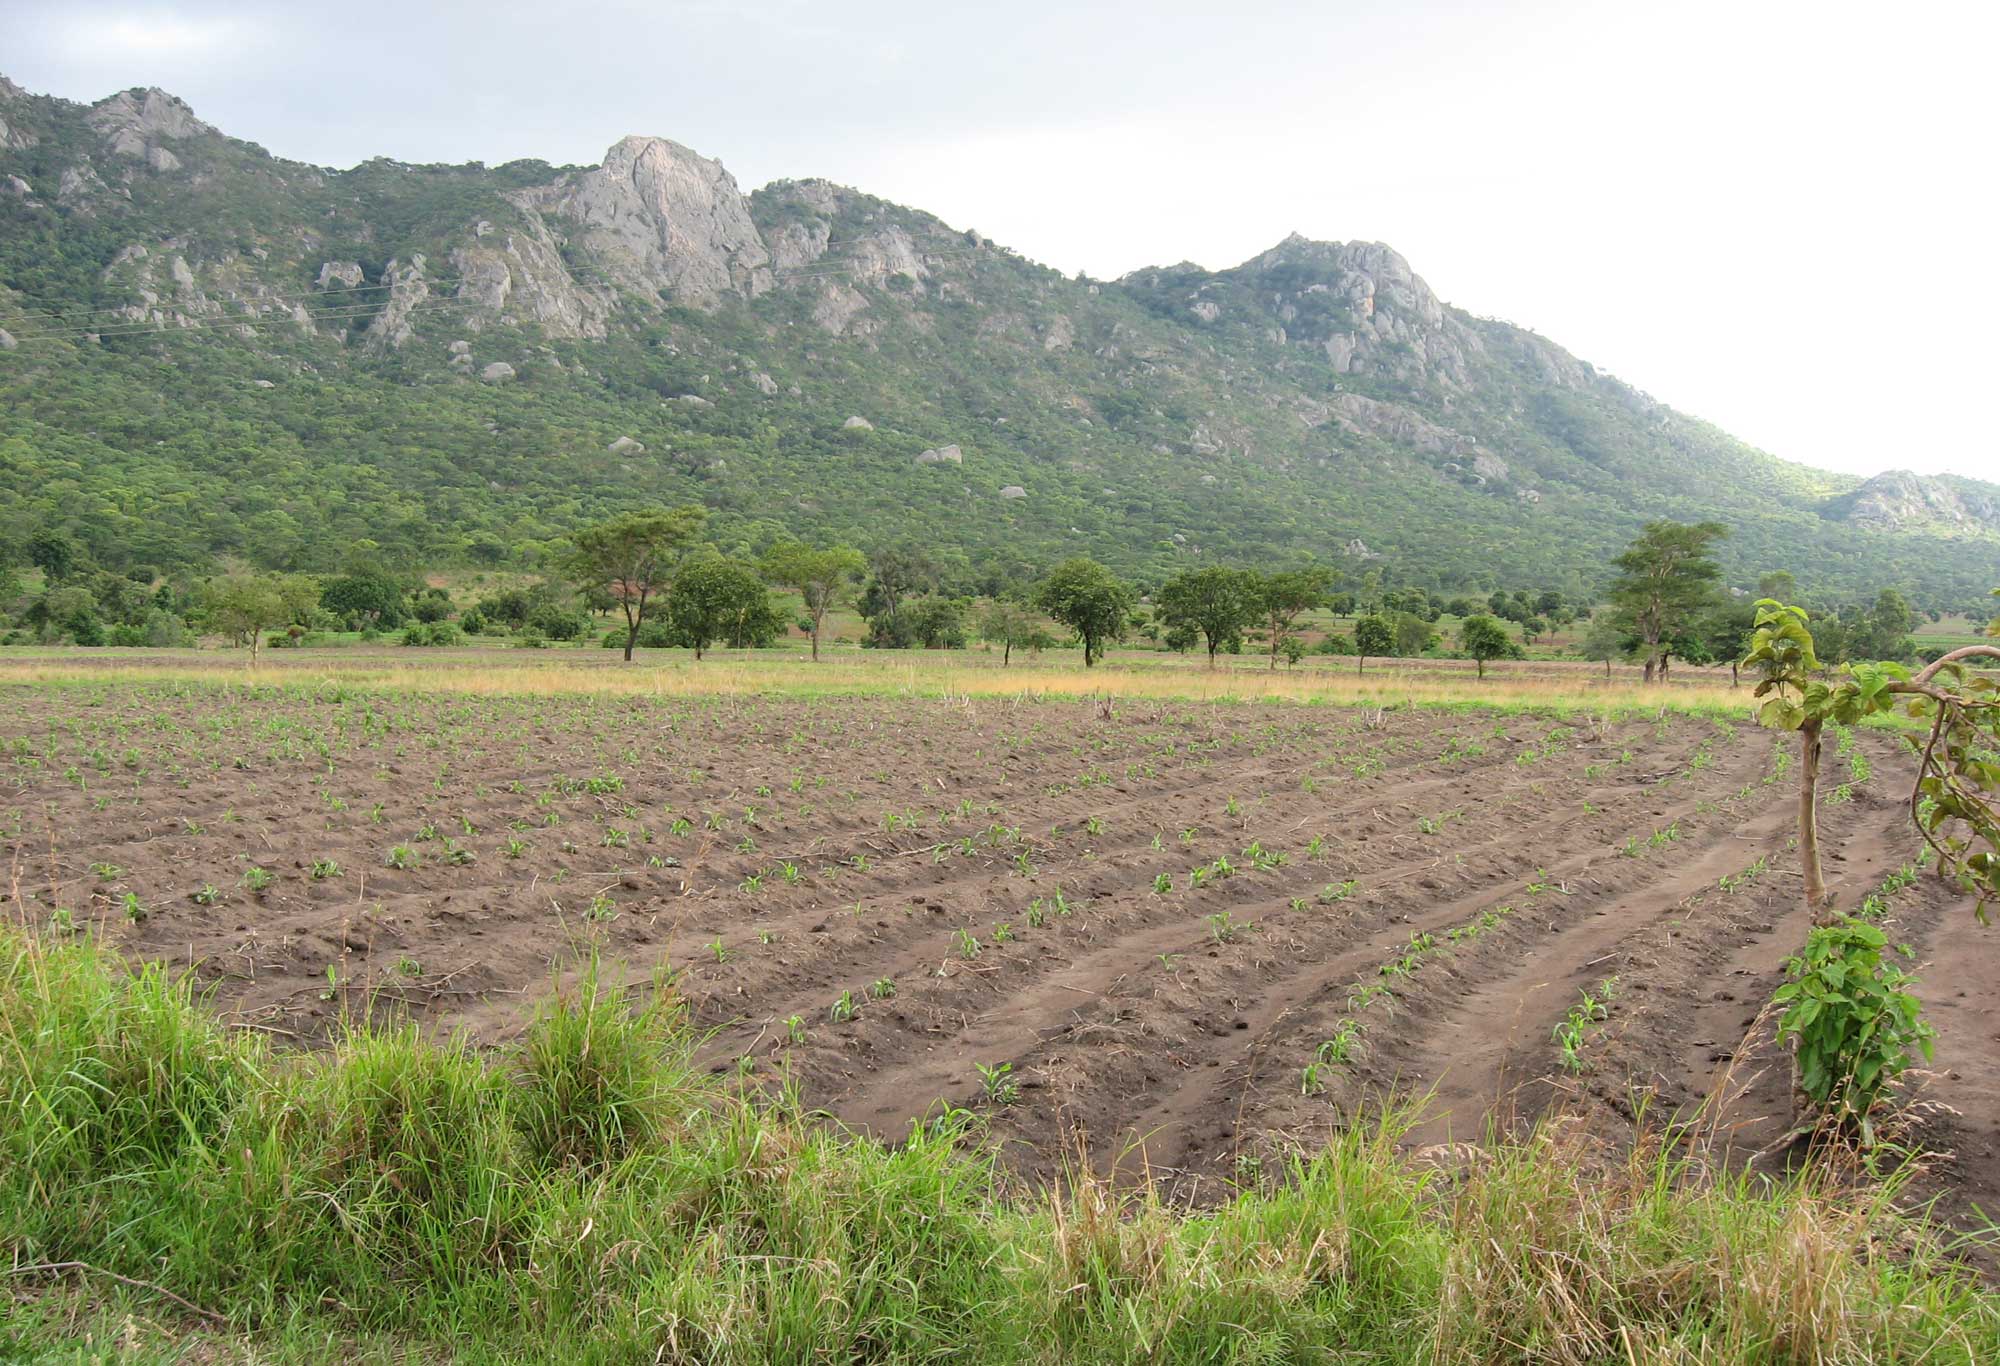 Photograph of young maize plants growing in rows in a cultivated field. The plants are barely visible on parallel ridges in the soil.